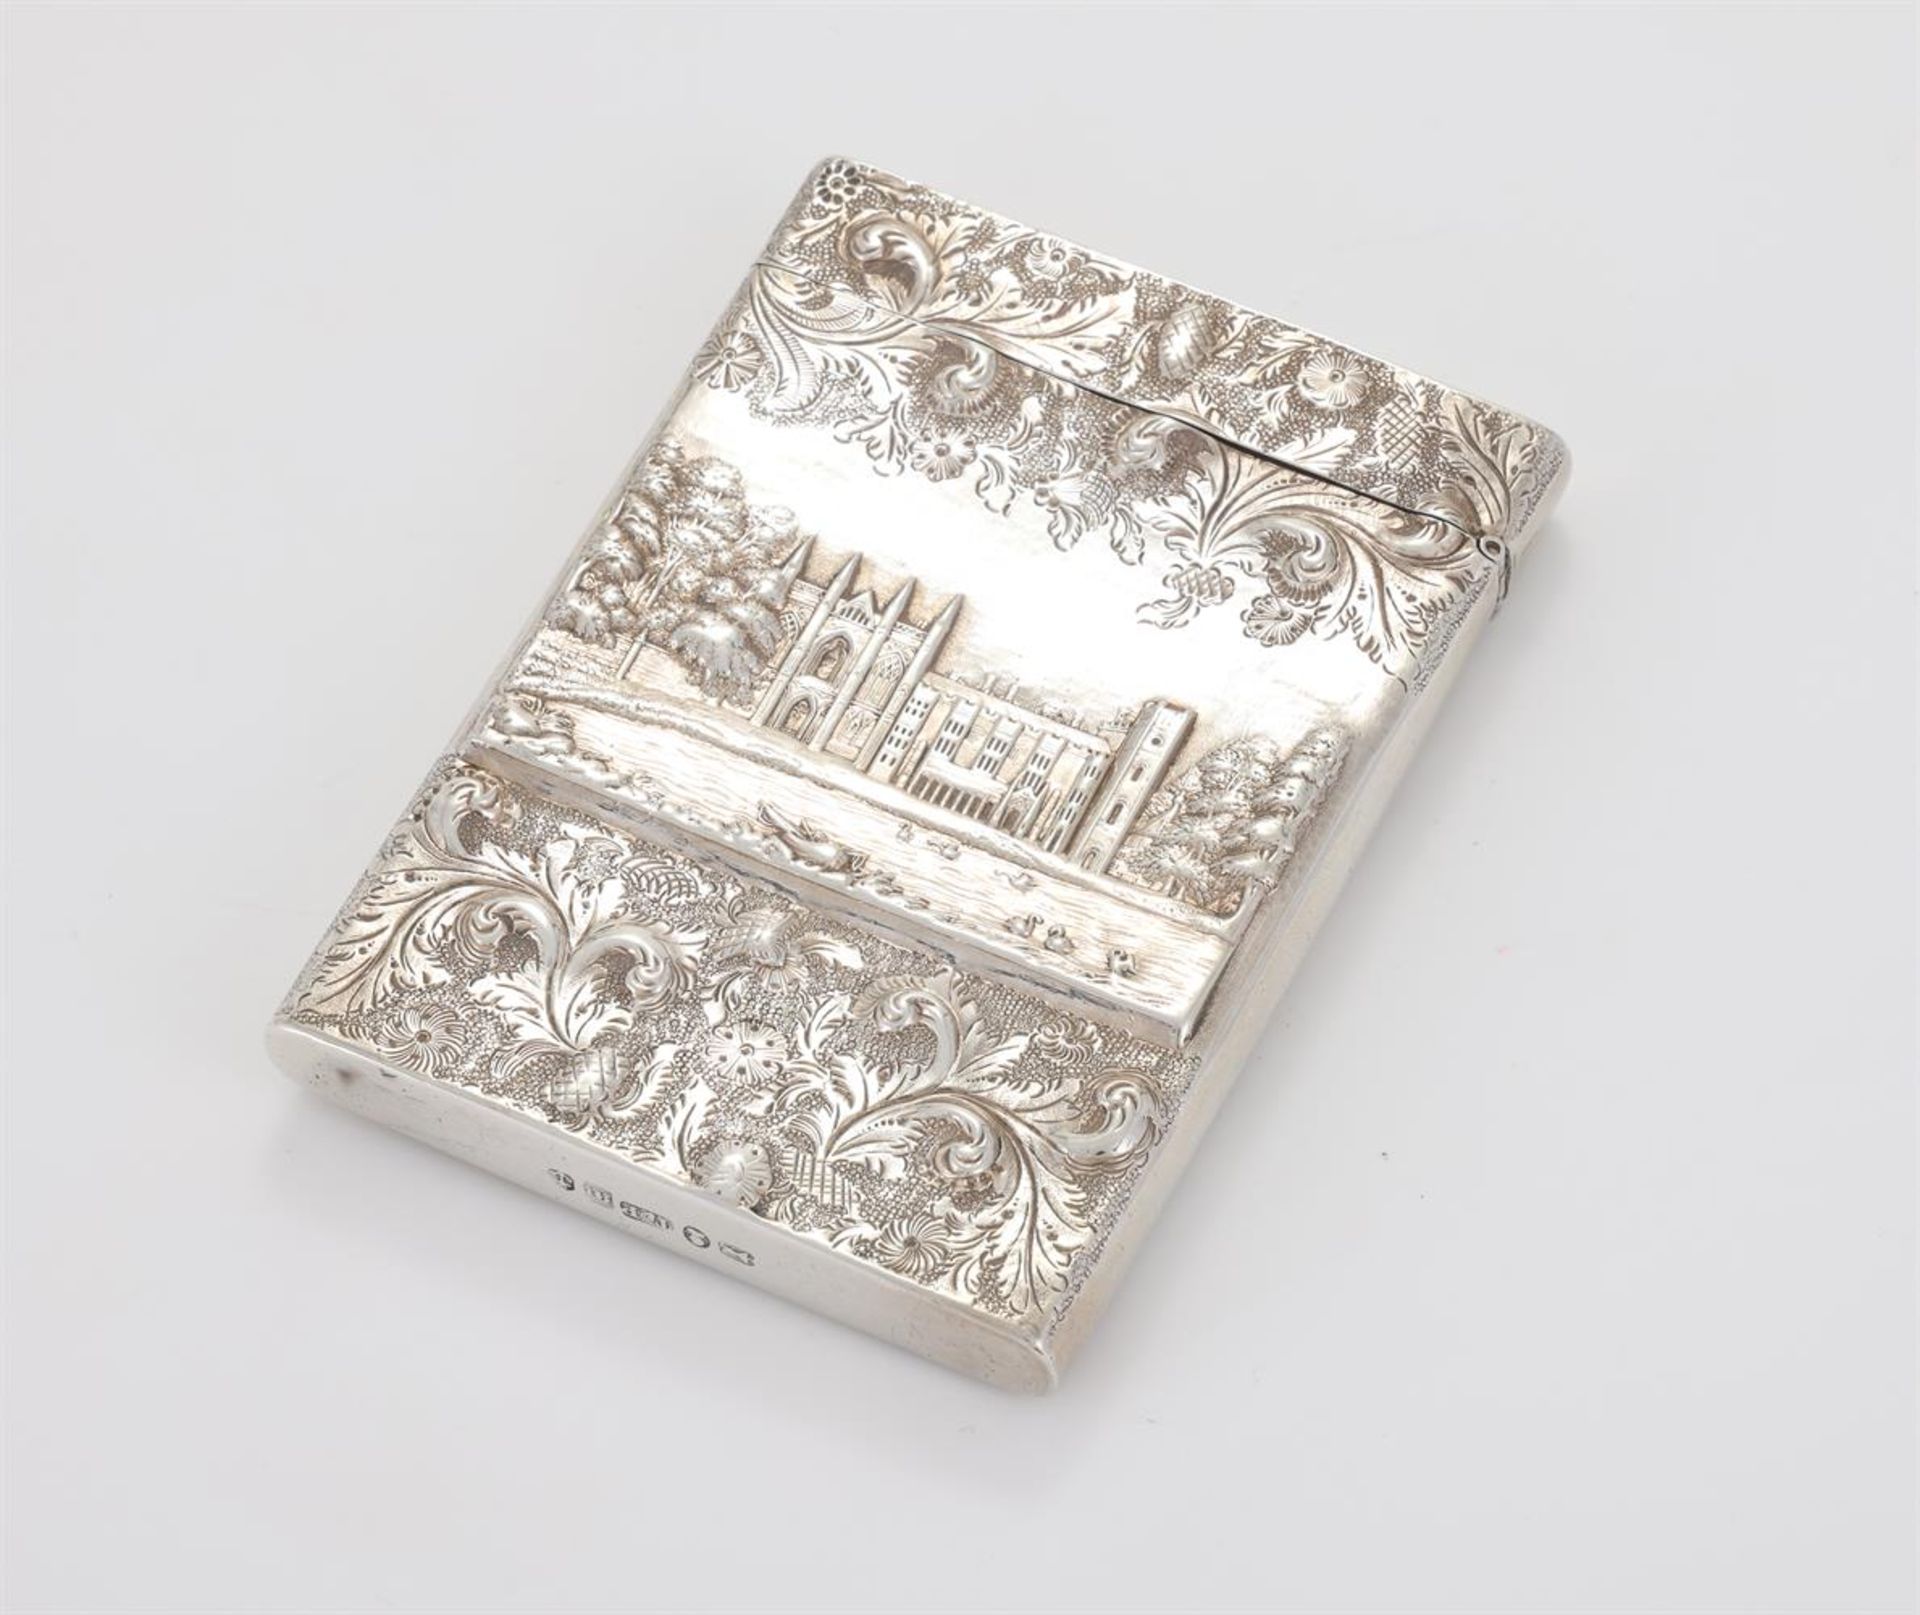 A WILLIAM IV SILVER RECTANGUALR DOUBLE SIDED CASTLE TOP CARD CASE, TAYLOR & PERRY, BIRMINGHAM 1835 - Image 5 of 6